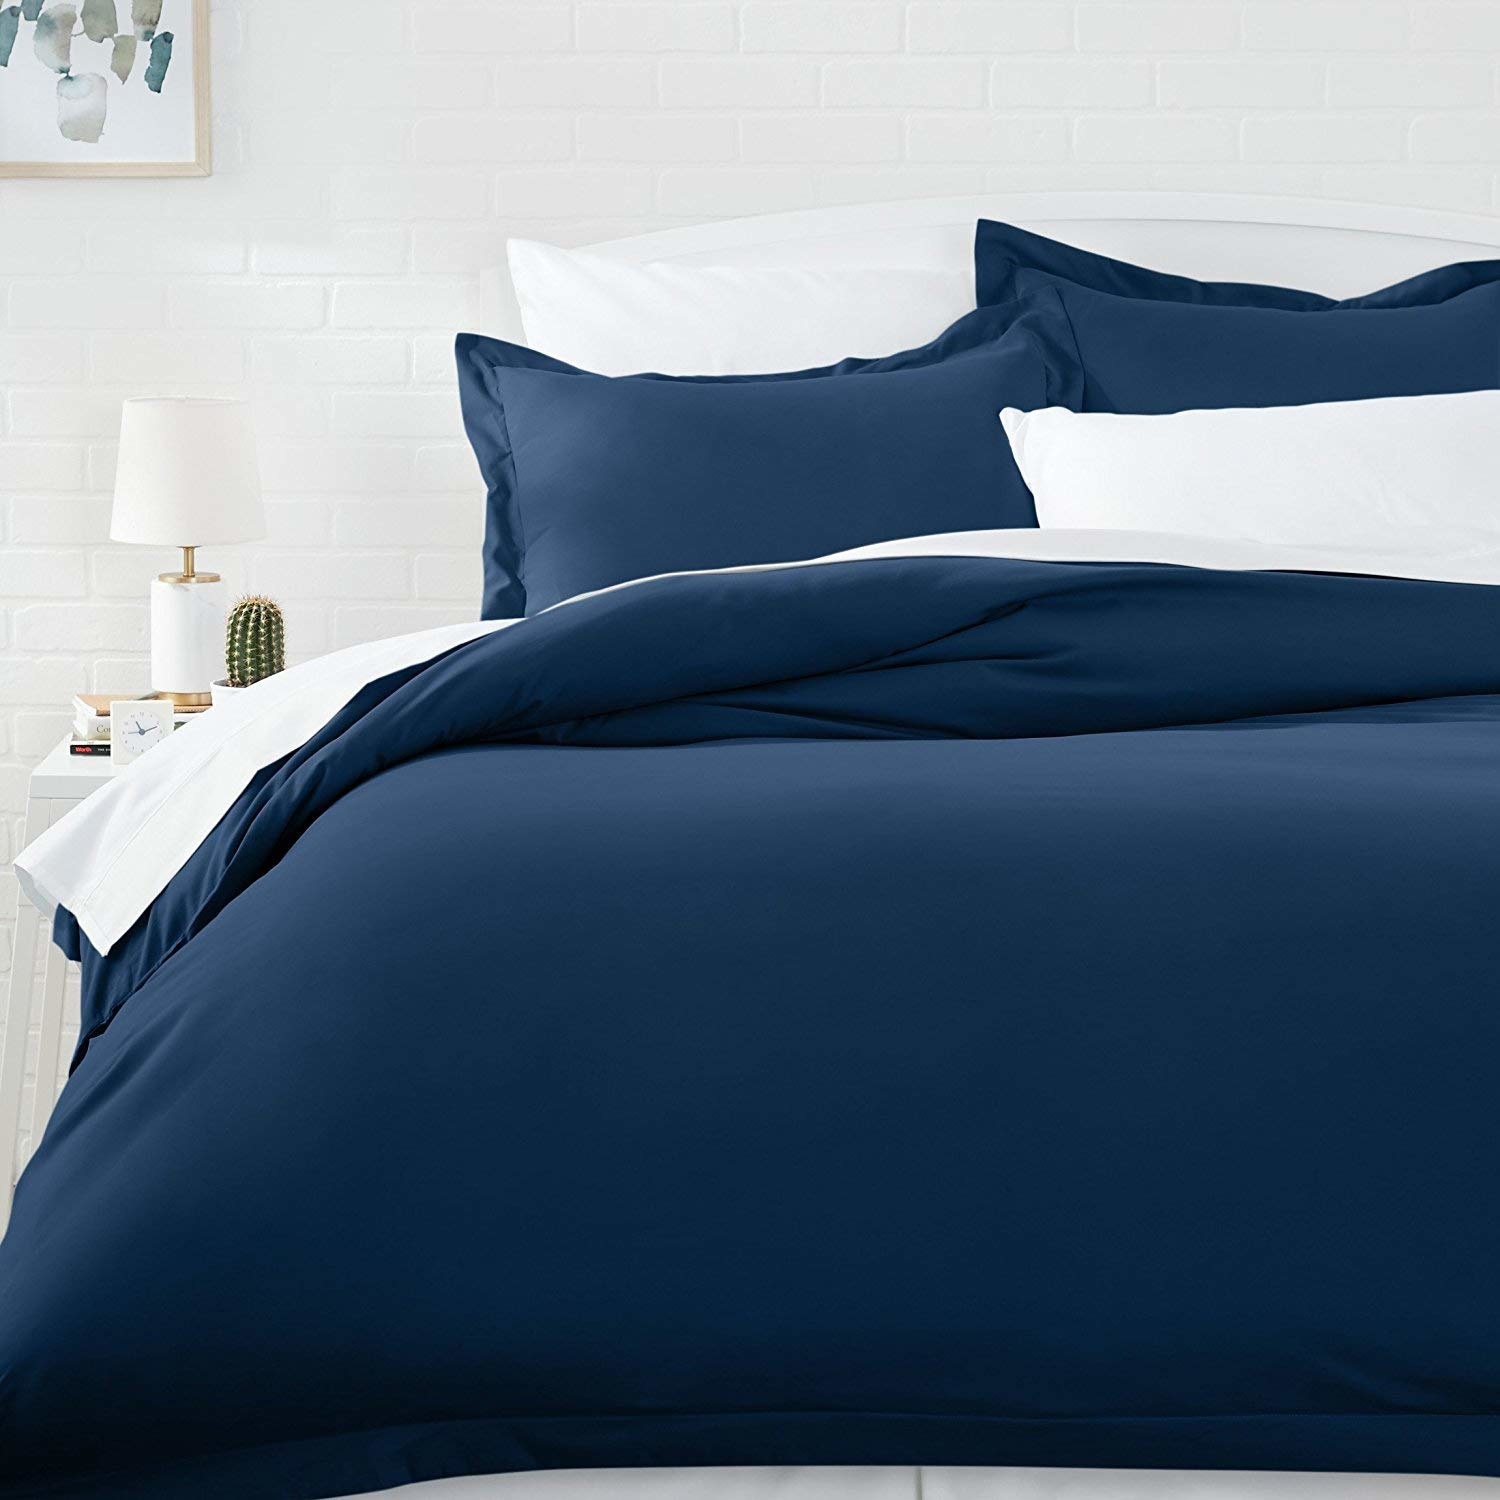 A blue microfiber duvet cover on a bed